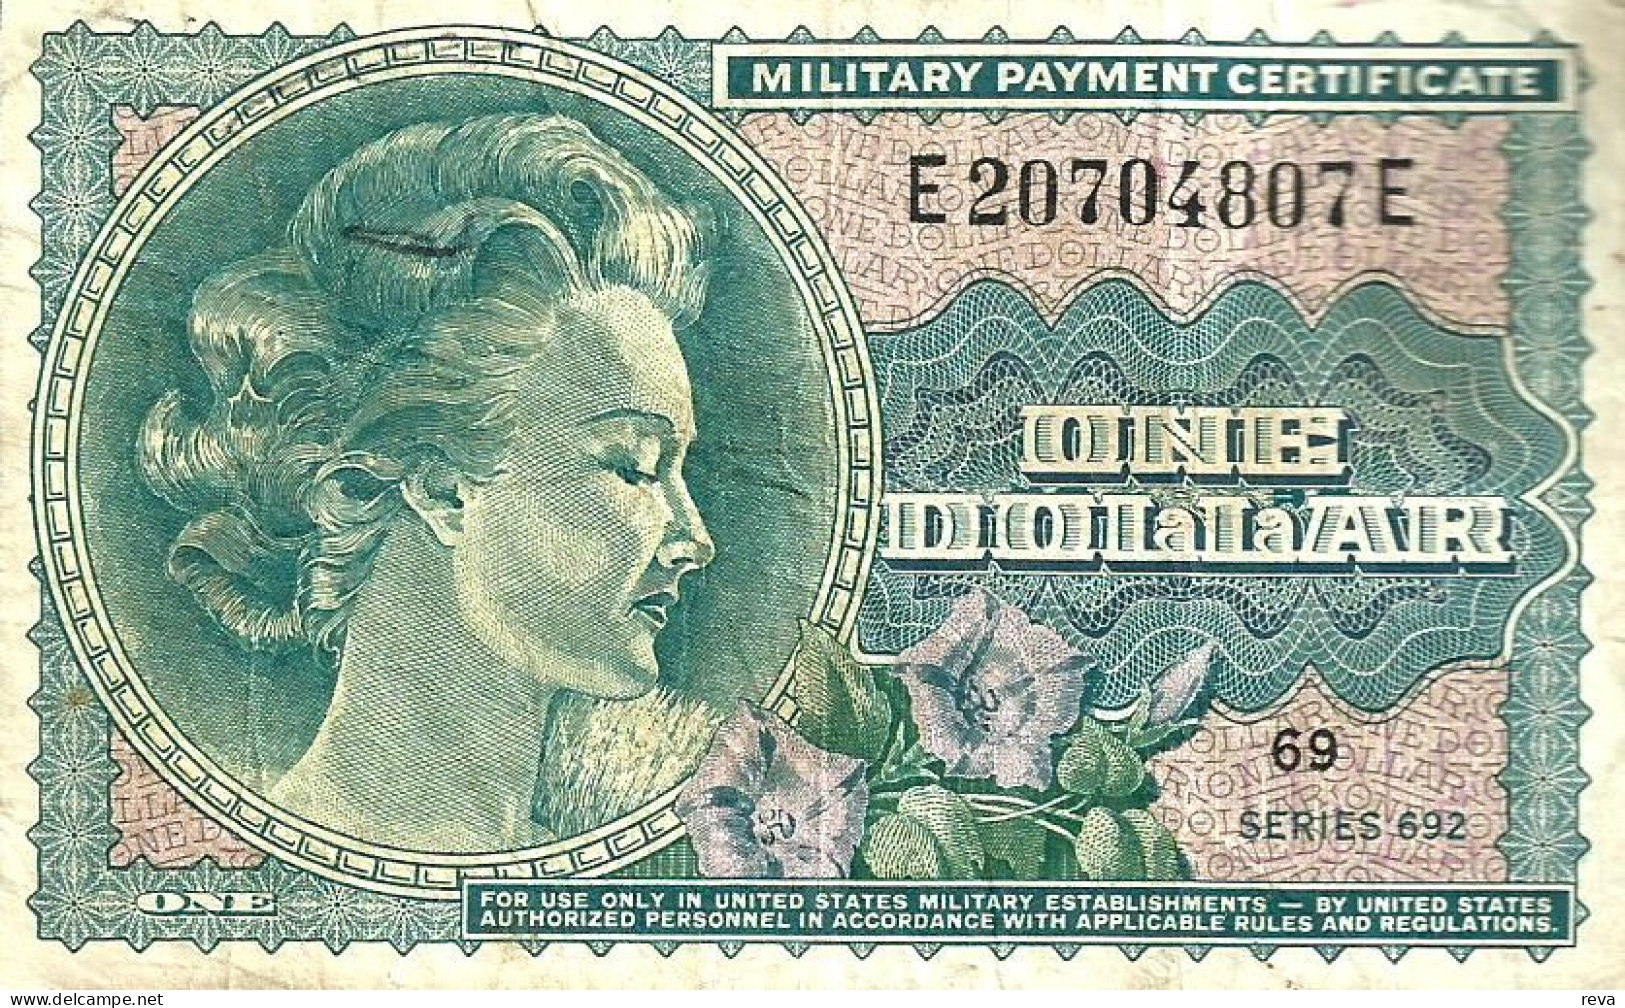 USA UNITED STATES $1 MILITARY CERTIFICATE GREEN WOMAN SERIES 692 VF ND(1970) PM93a READ DESCRIPTION CAREFULLY !! - 1970 - Serie 692